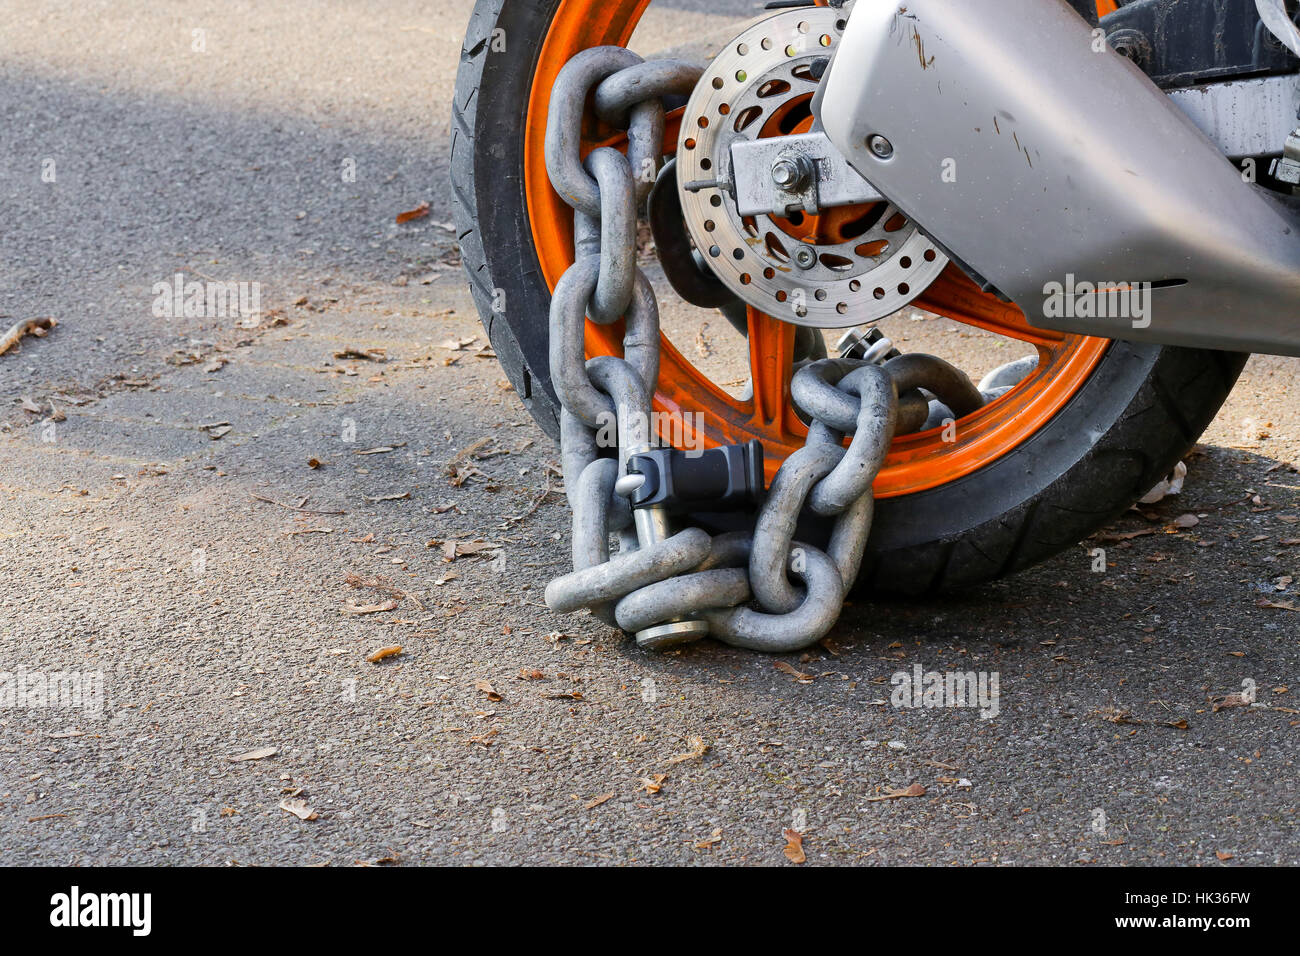 Motorcycle anti-theft chain with padlock security lock on rear wheel, protection against theft Stock Photo